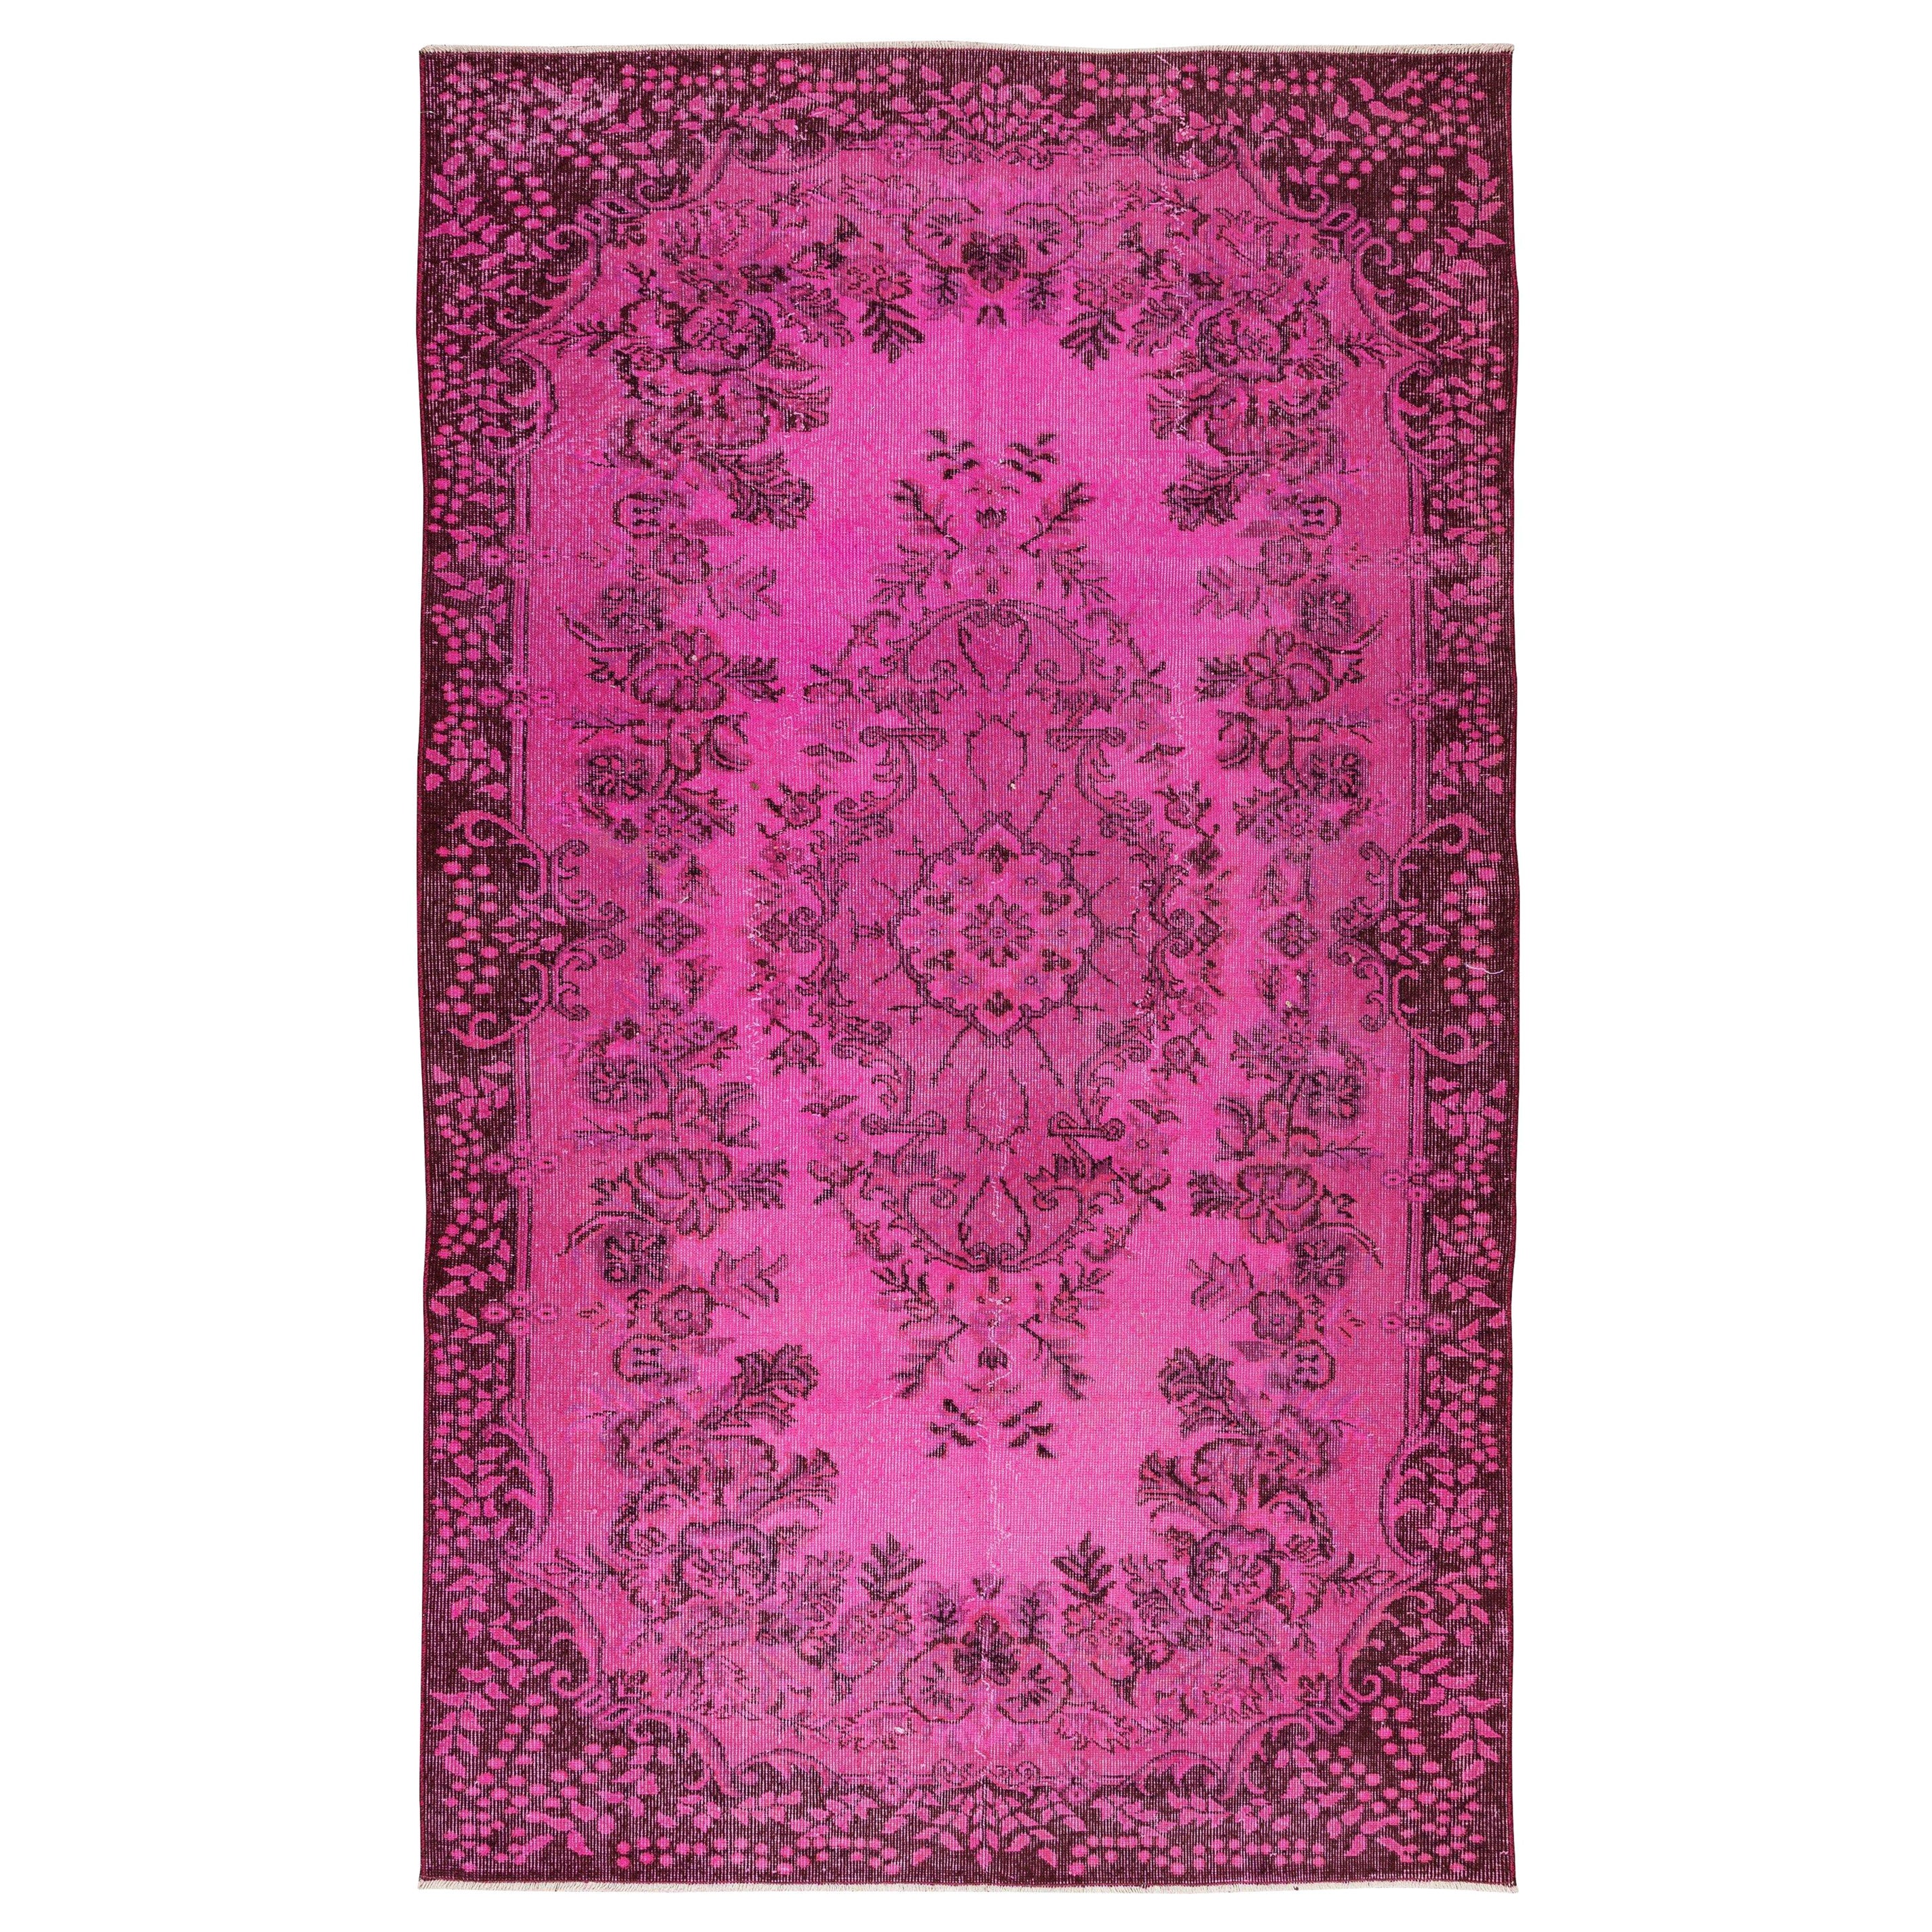 5x8.6 Ft Hot Pink Contemporary Handmade Turkish Area Rug with Medallion Design